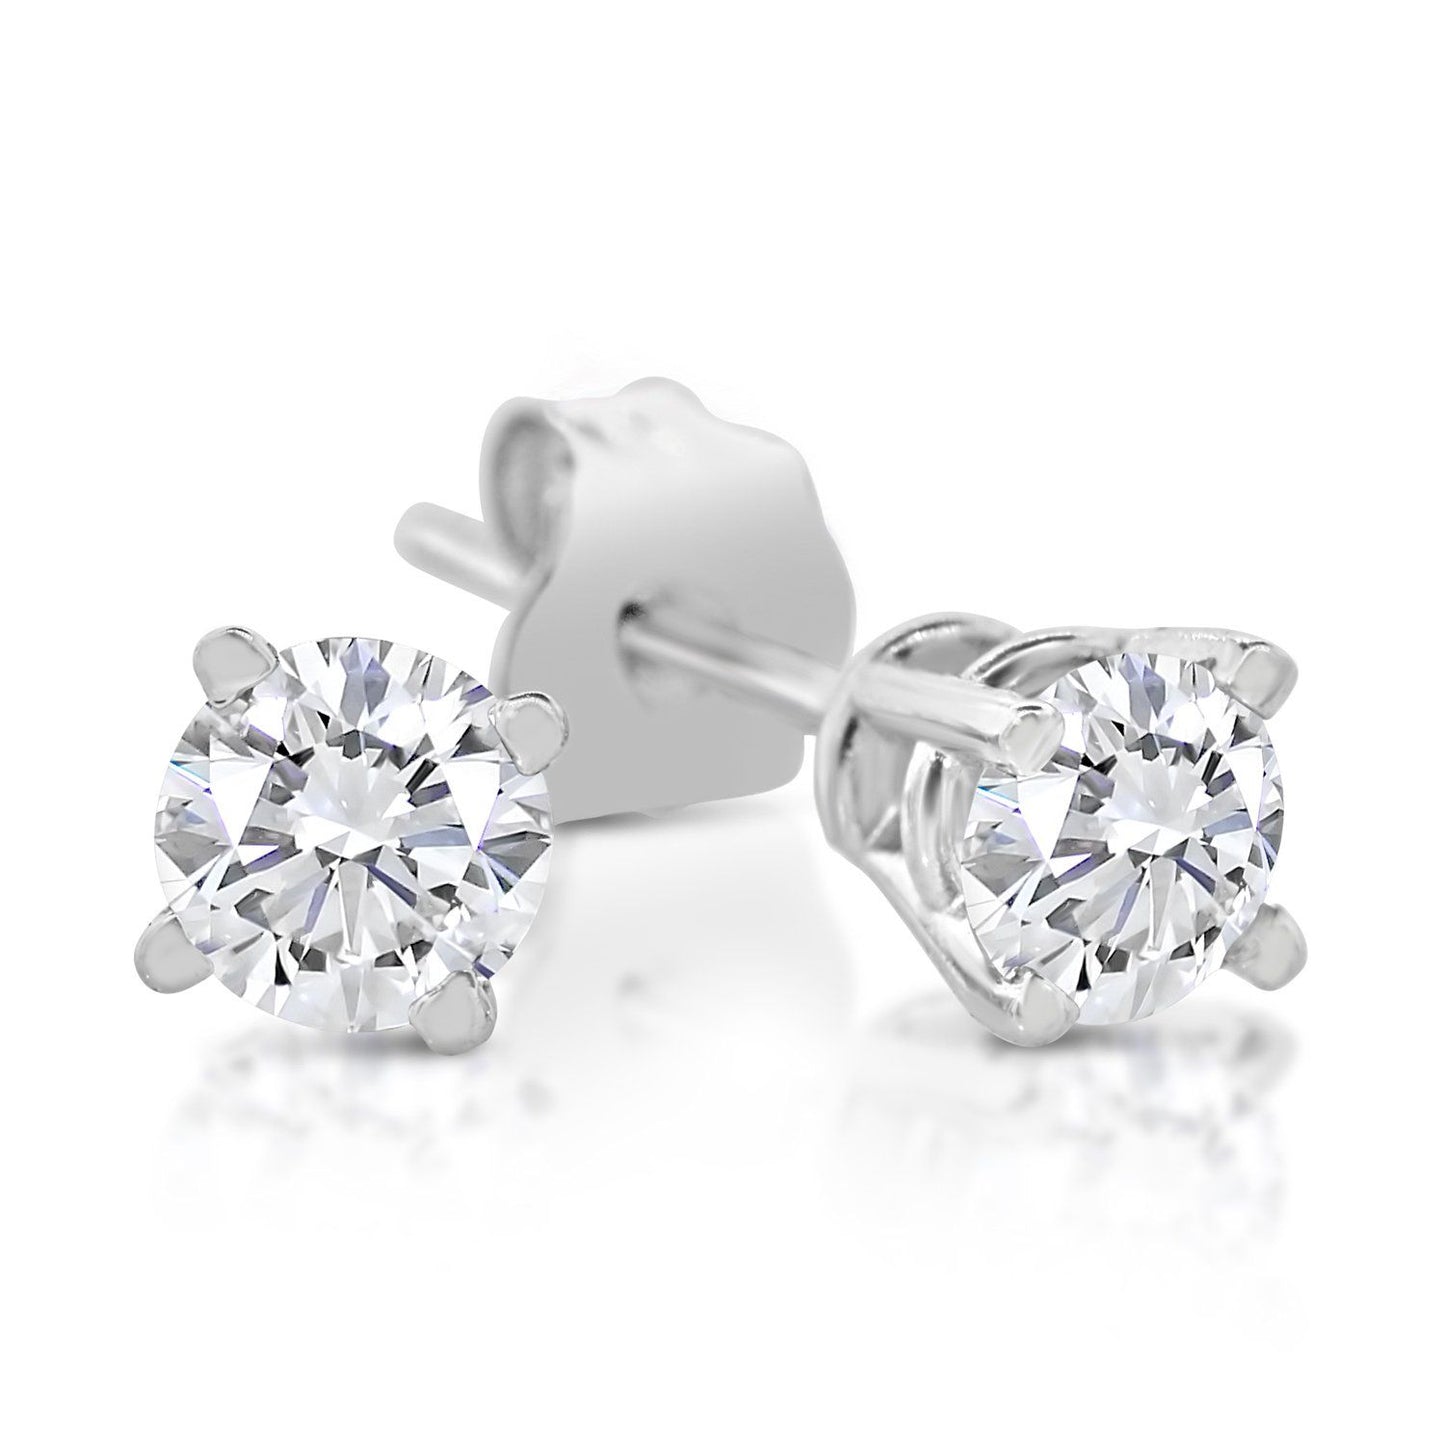 1/3 Carat TW AGS Certified Round Diamond Solitaire Stud Earrings in 14K White Gold (K/L Color - I1/I2 Clarity)